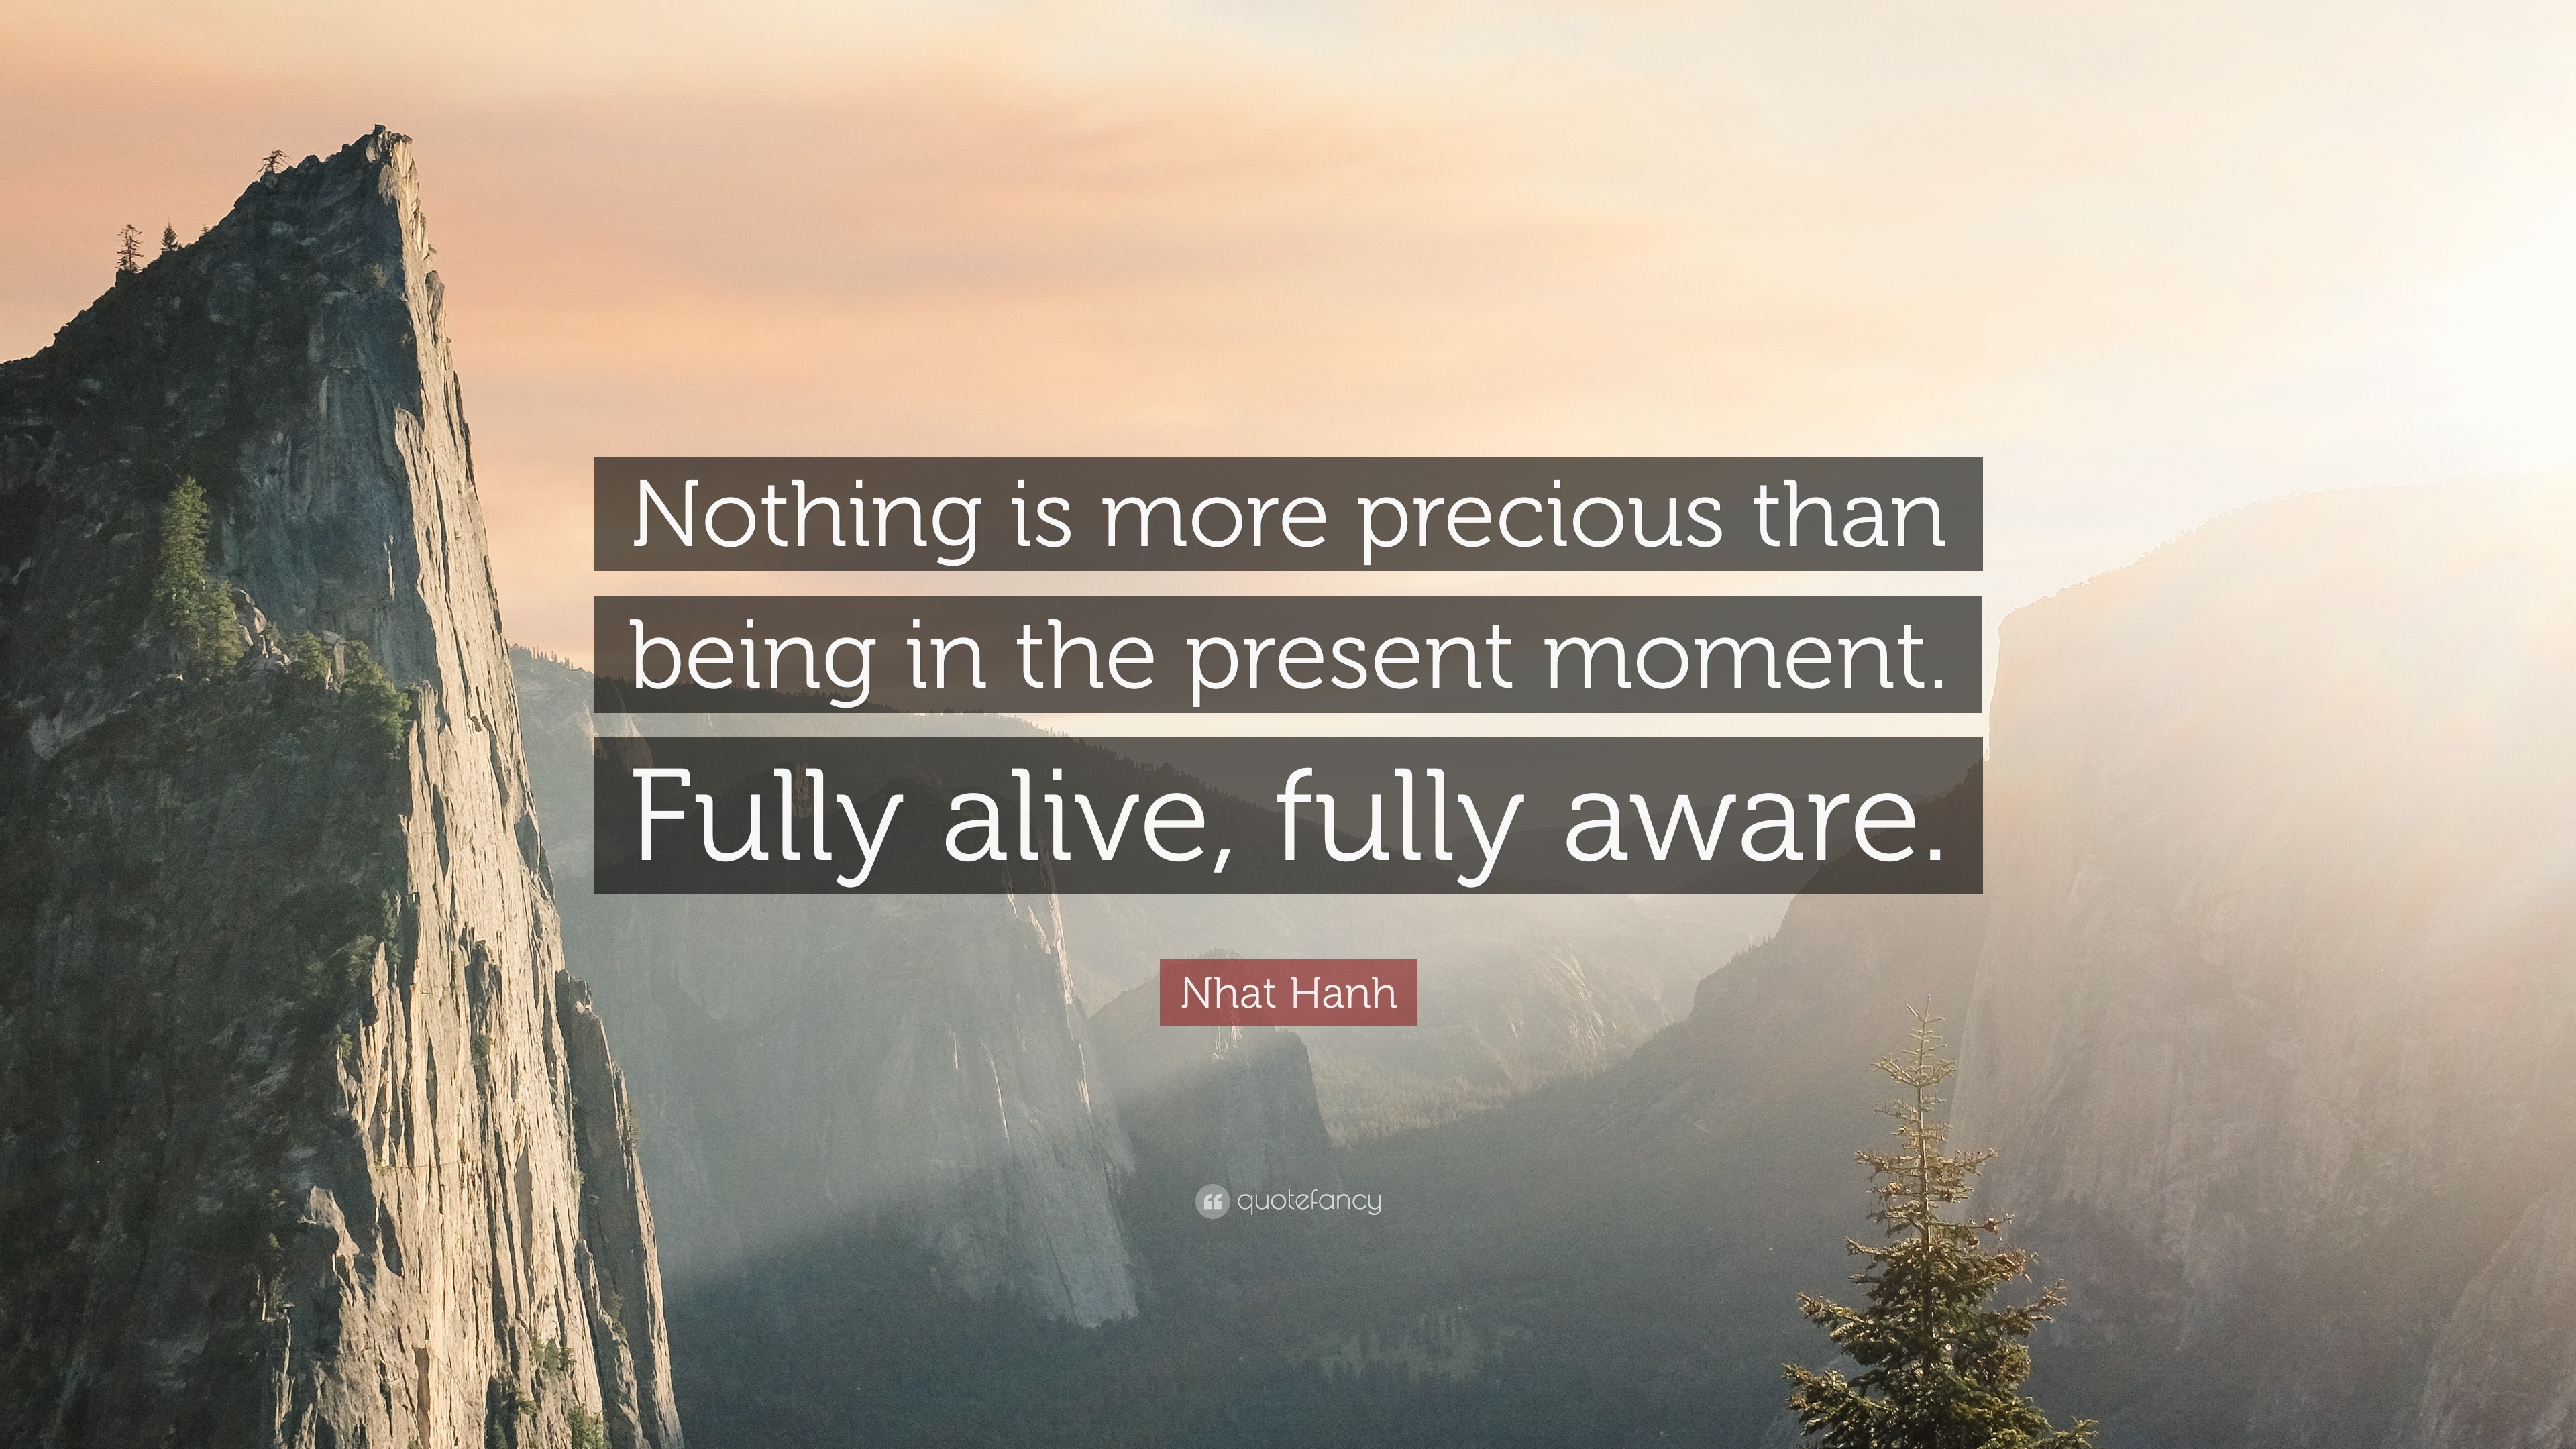 68591 Nhat Hanh Quote Nothing is more precious than being in the present